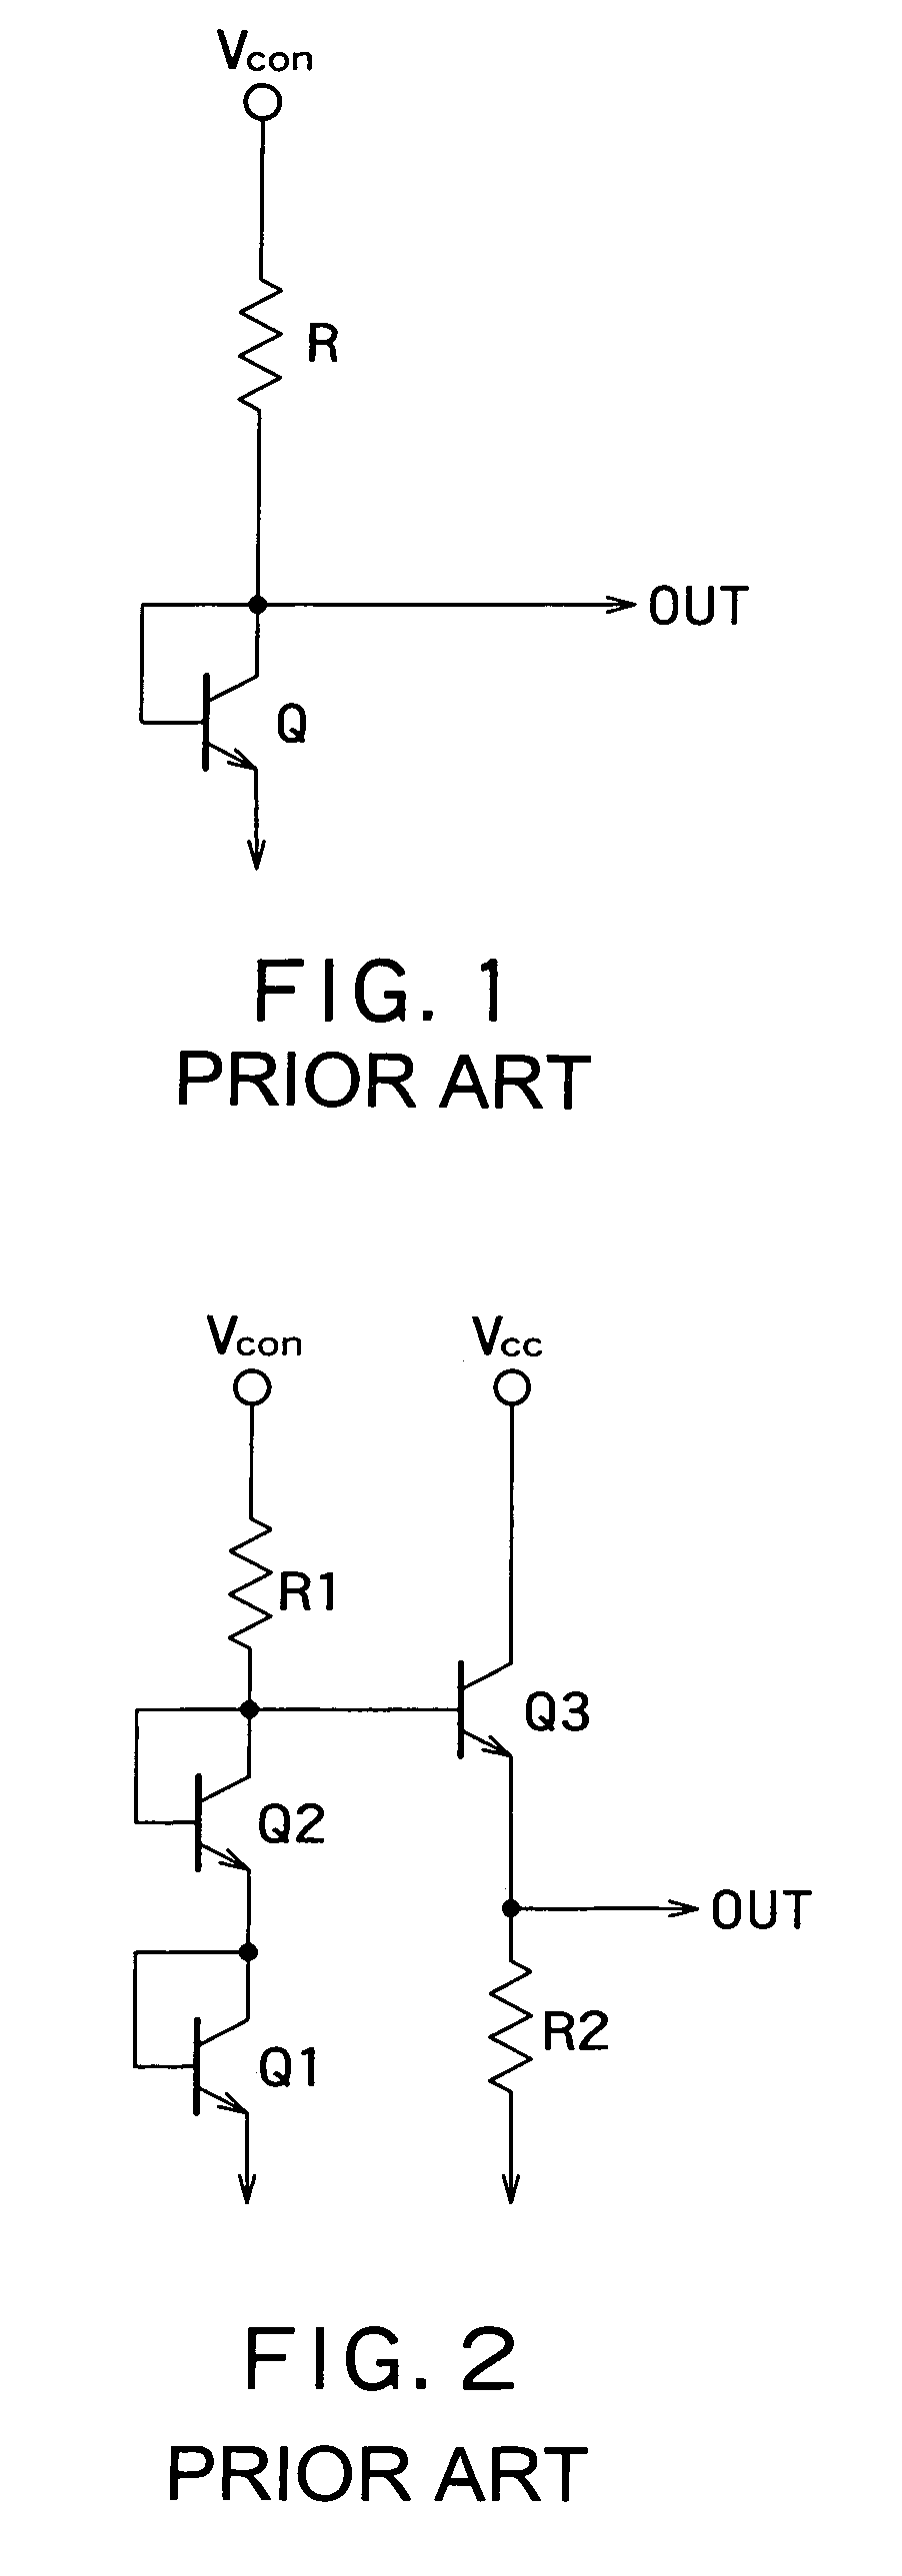 Bias current supply circuit and amplification circuit